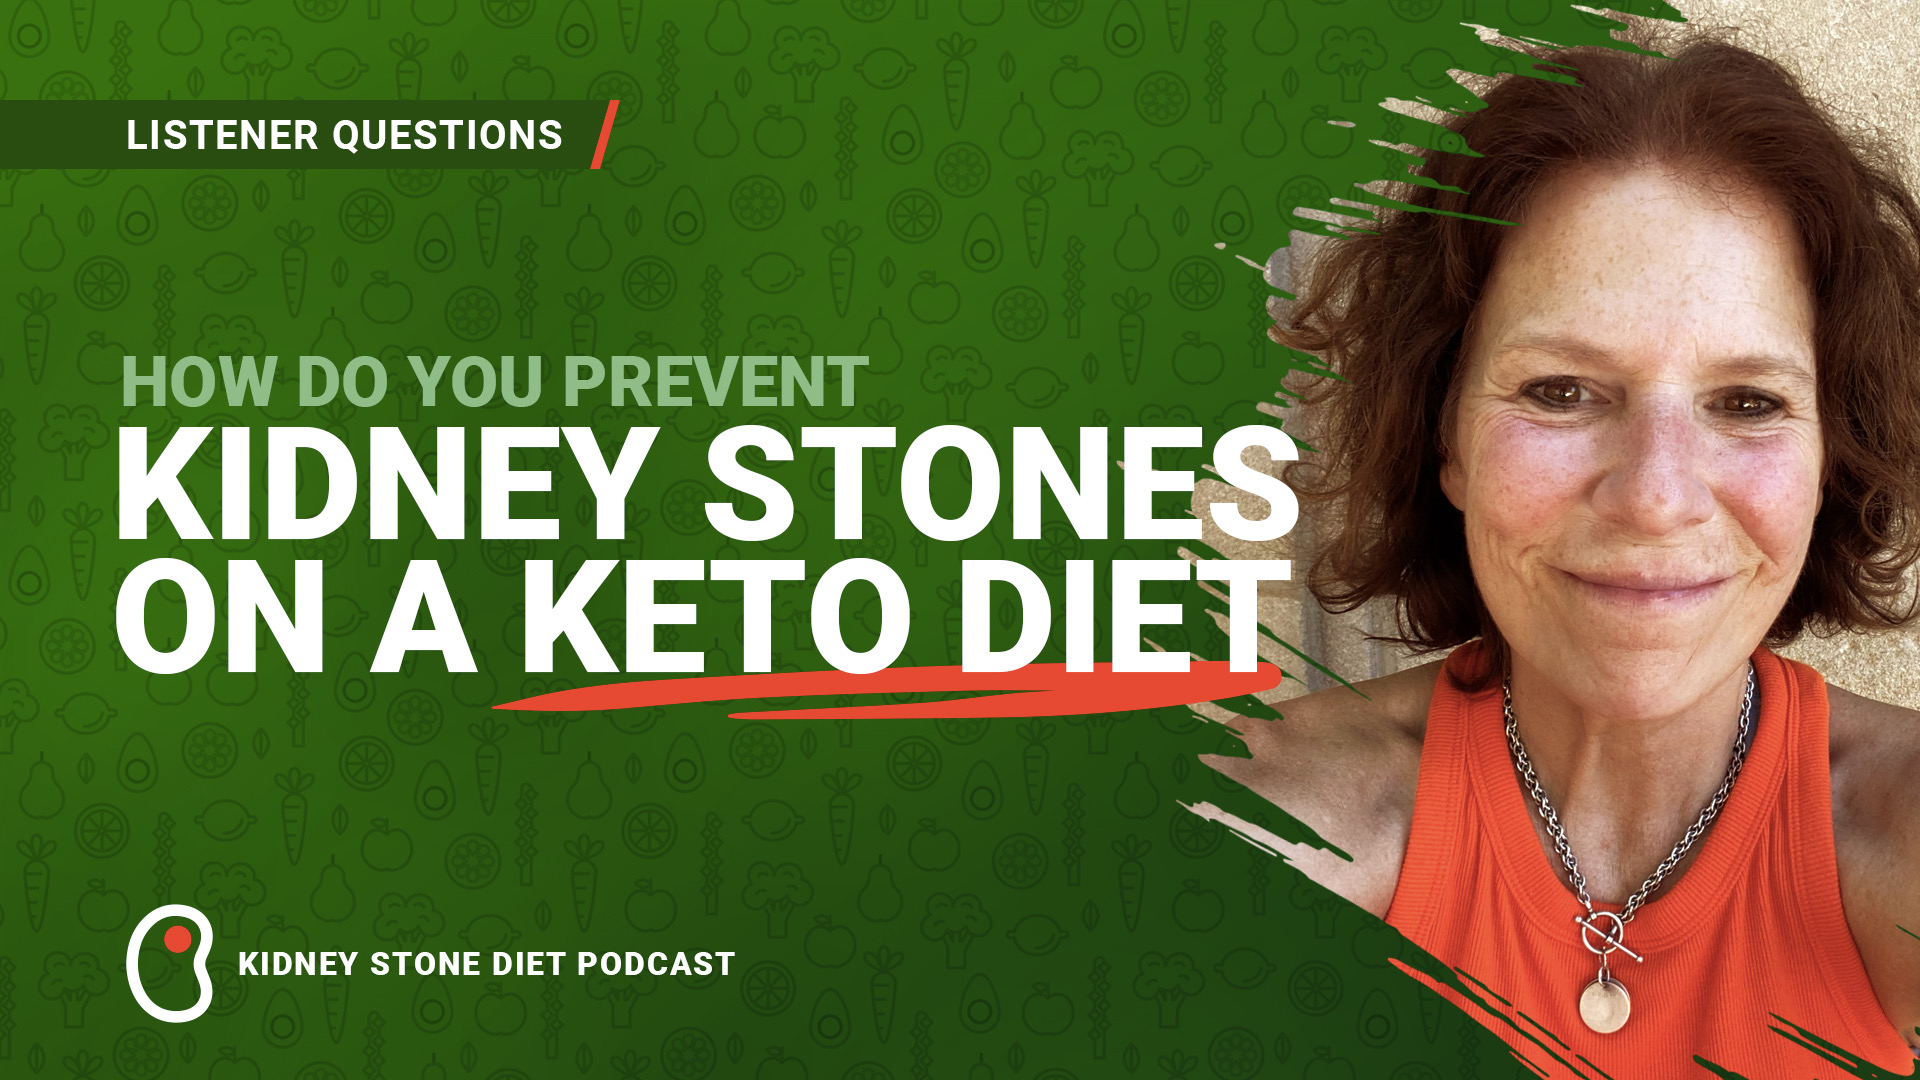 How do you prevent kidney stones on a keto diet?